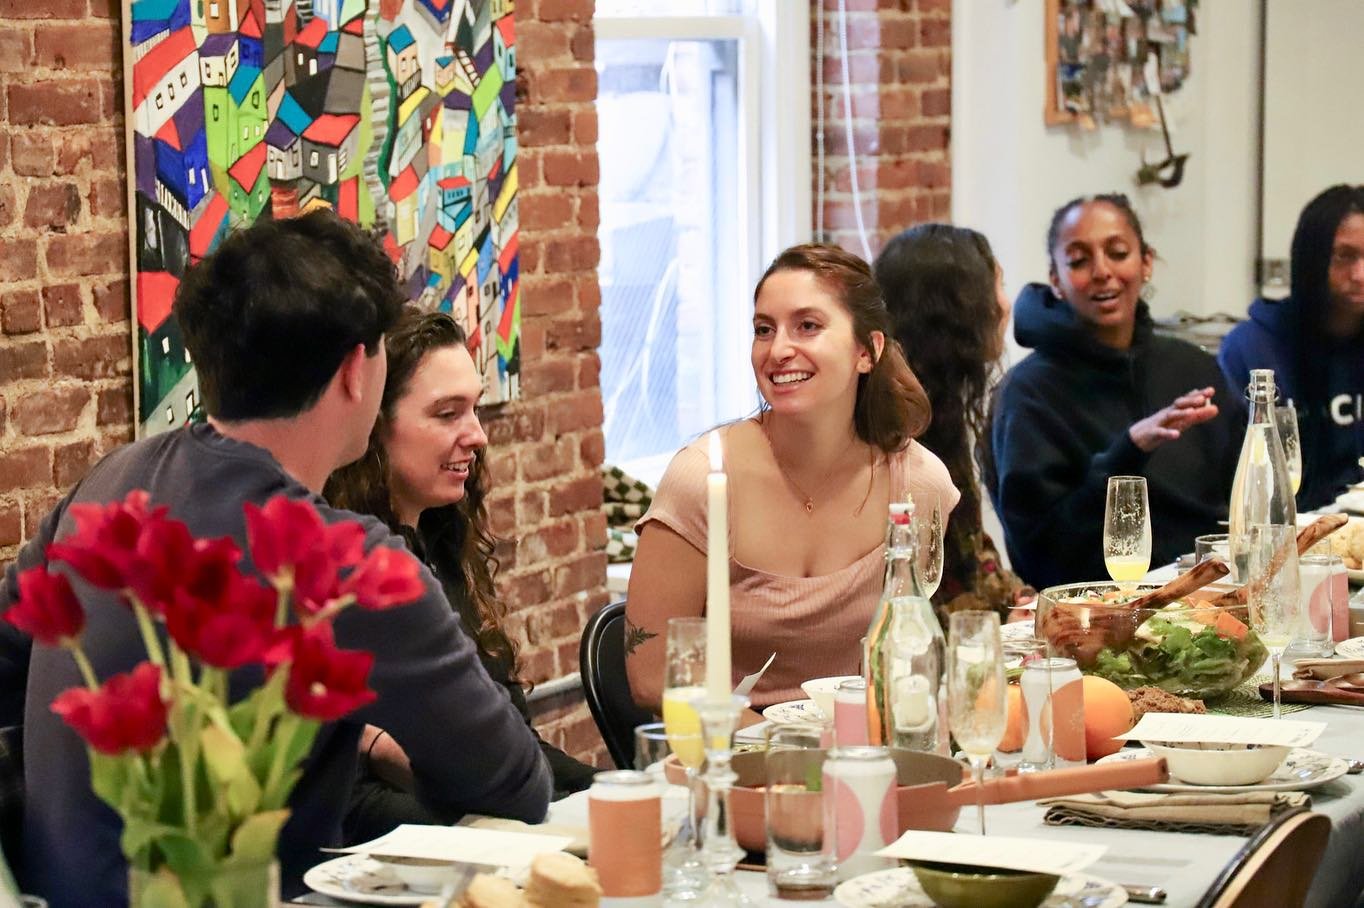 This weekend we hosted an &ldquo;Earth Month, Every Month&rdquo; brunch with @fancyscraps.supper &amp; @columbia_sumasa to converse about how we can collectively contribute to a more sustainable food system over a delicious meal 🍳🌱

Thank you to ou